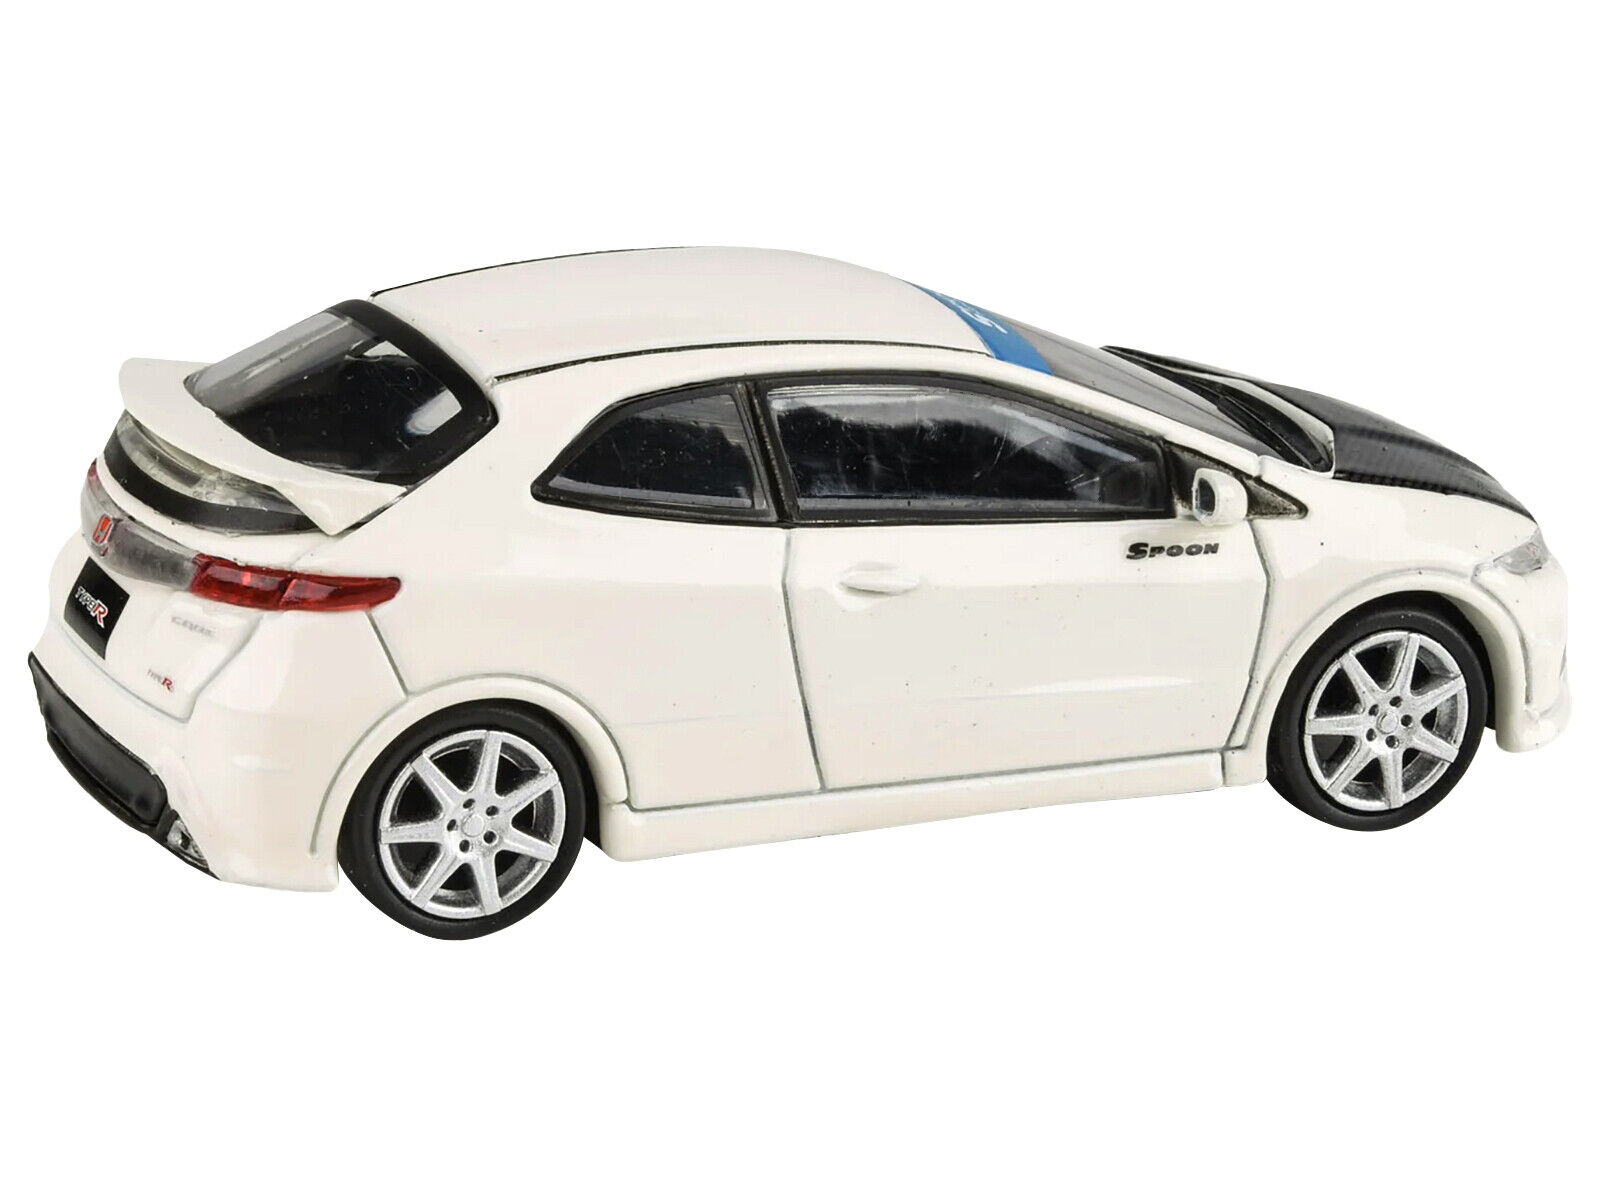 2007 Honda Civic Type R FN2 Championship White with Carbon Hood 1/64 Diecast